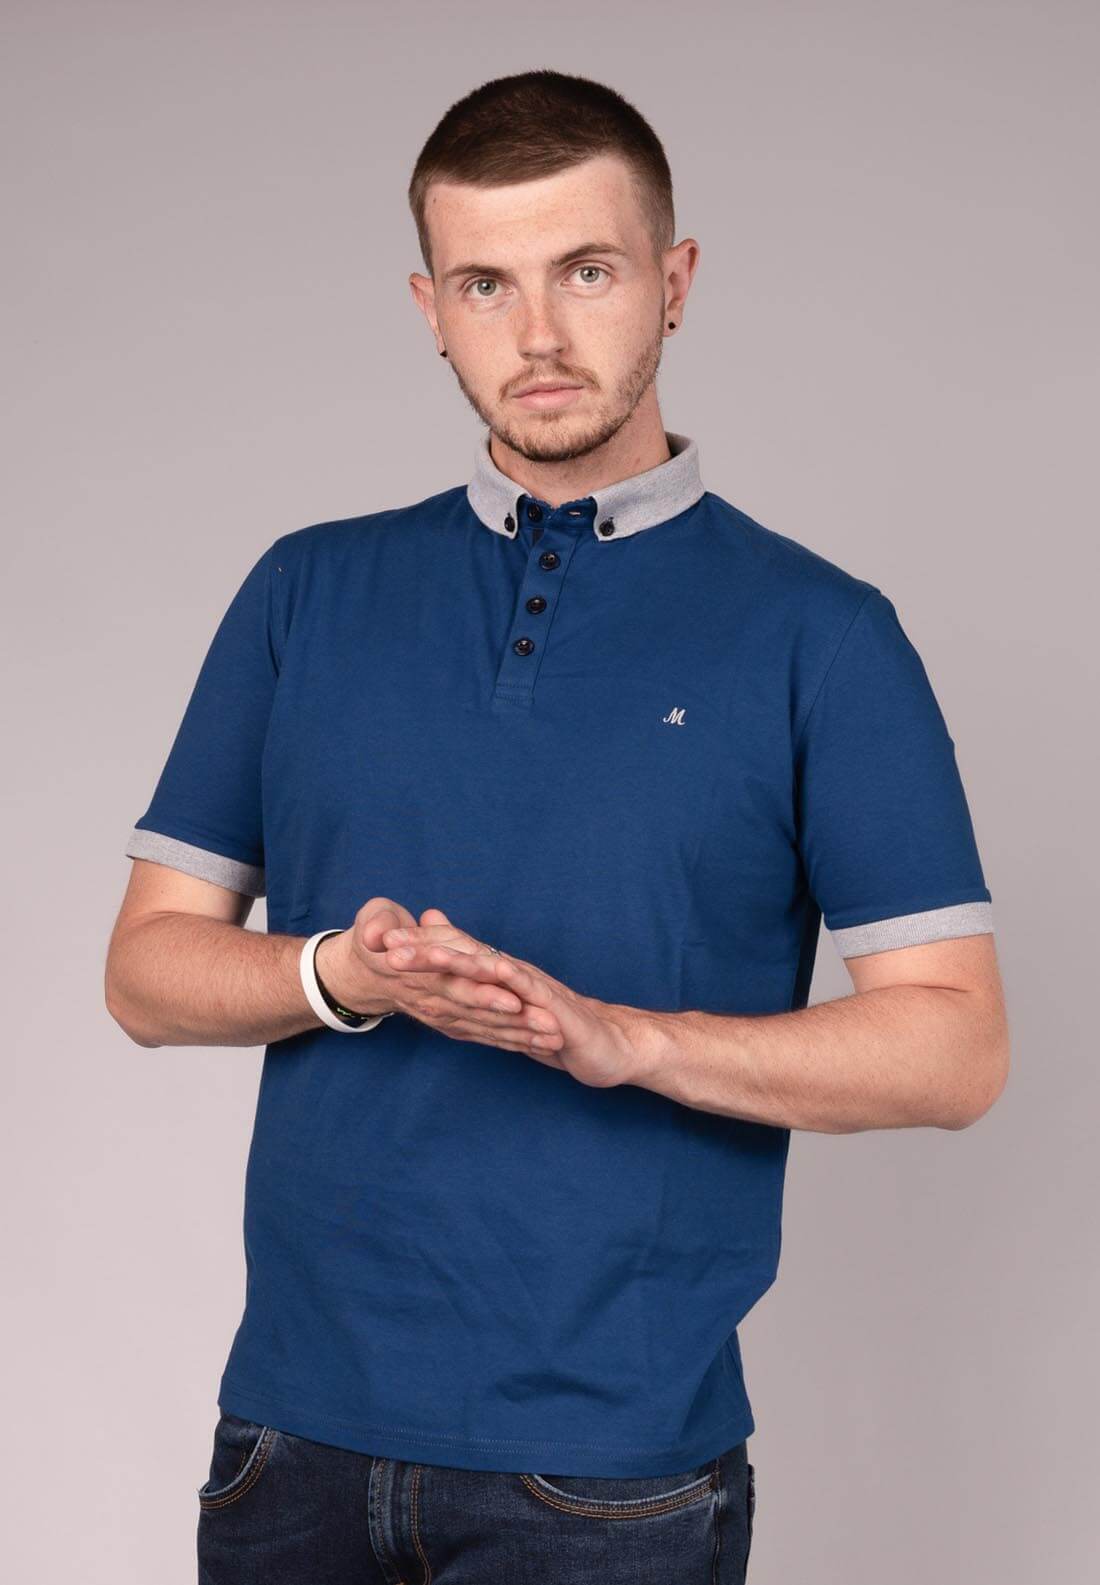 Mineral Princess Polo Shirt - Blue 1 Shaws Department Stores